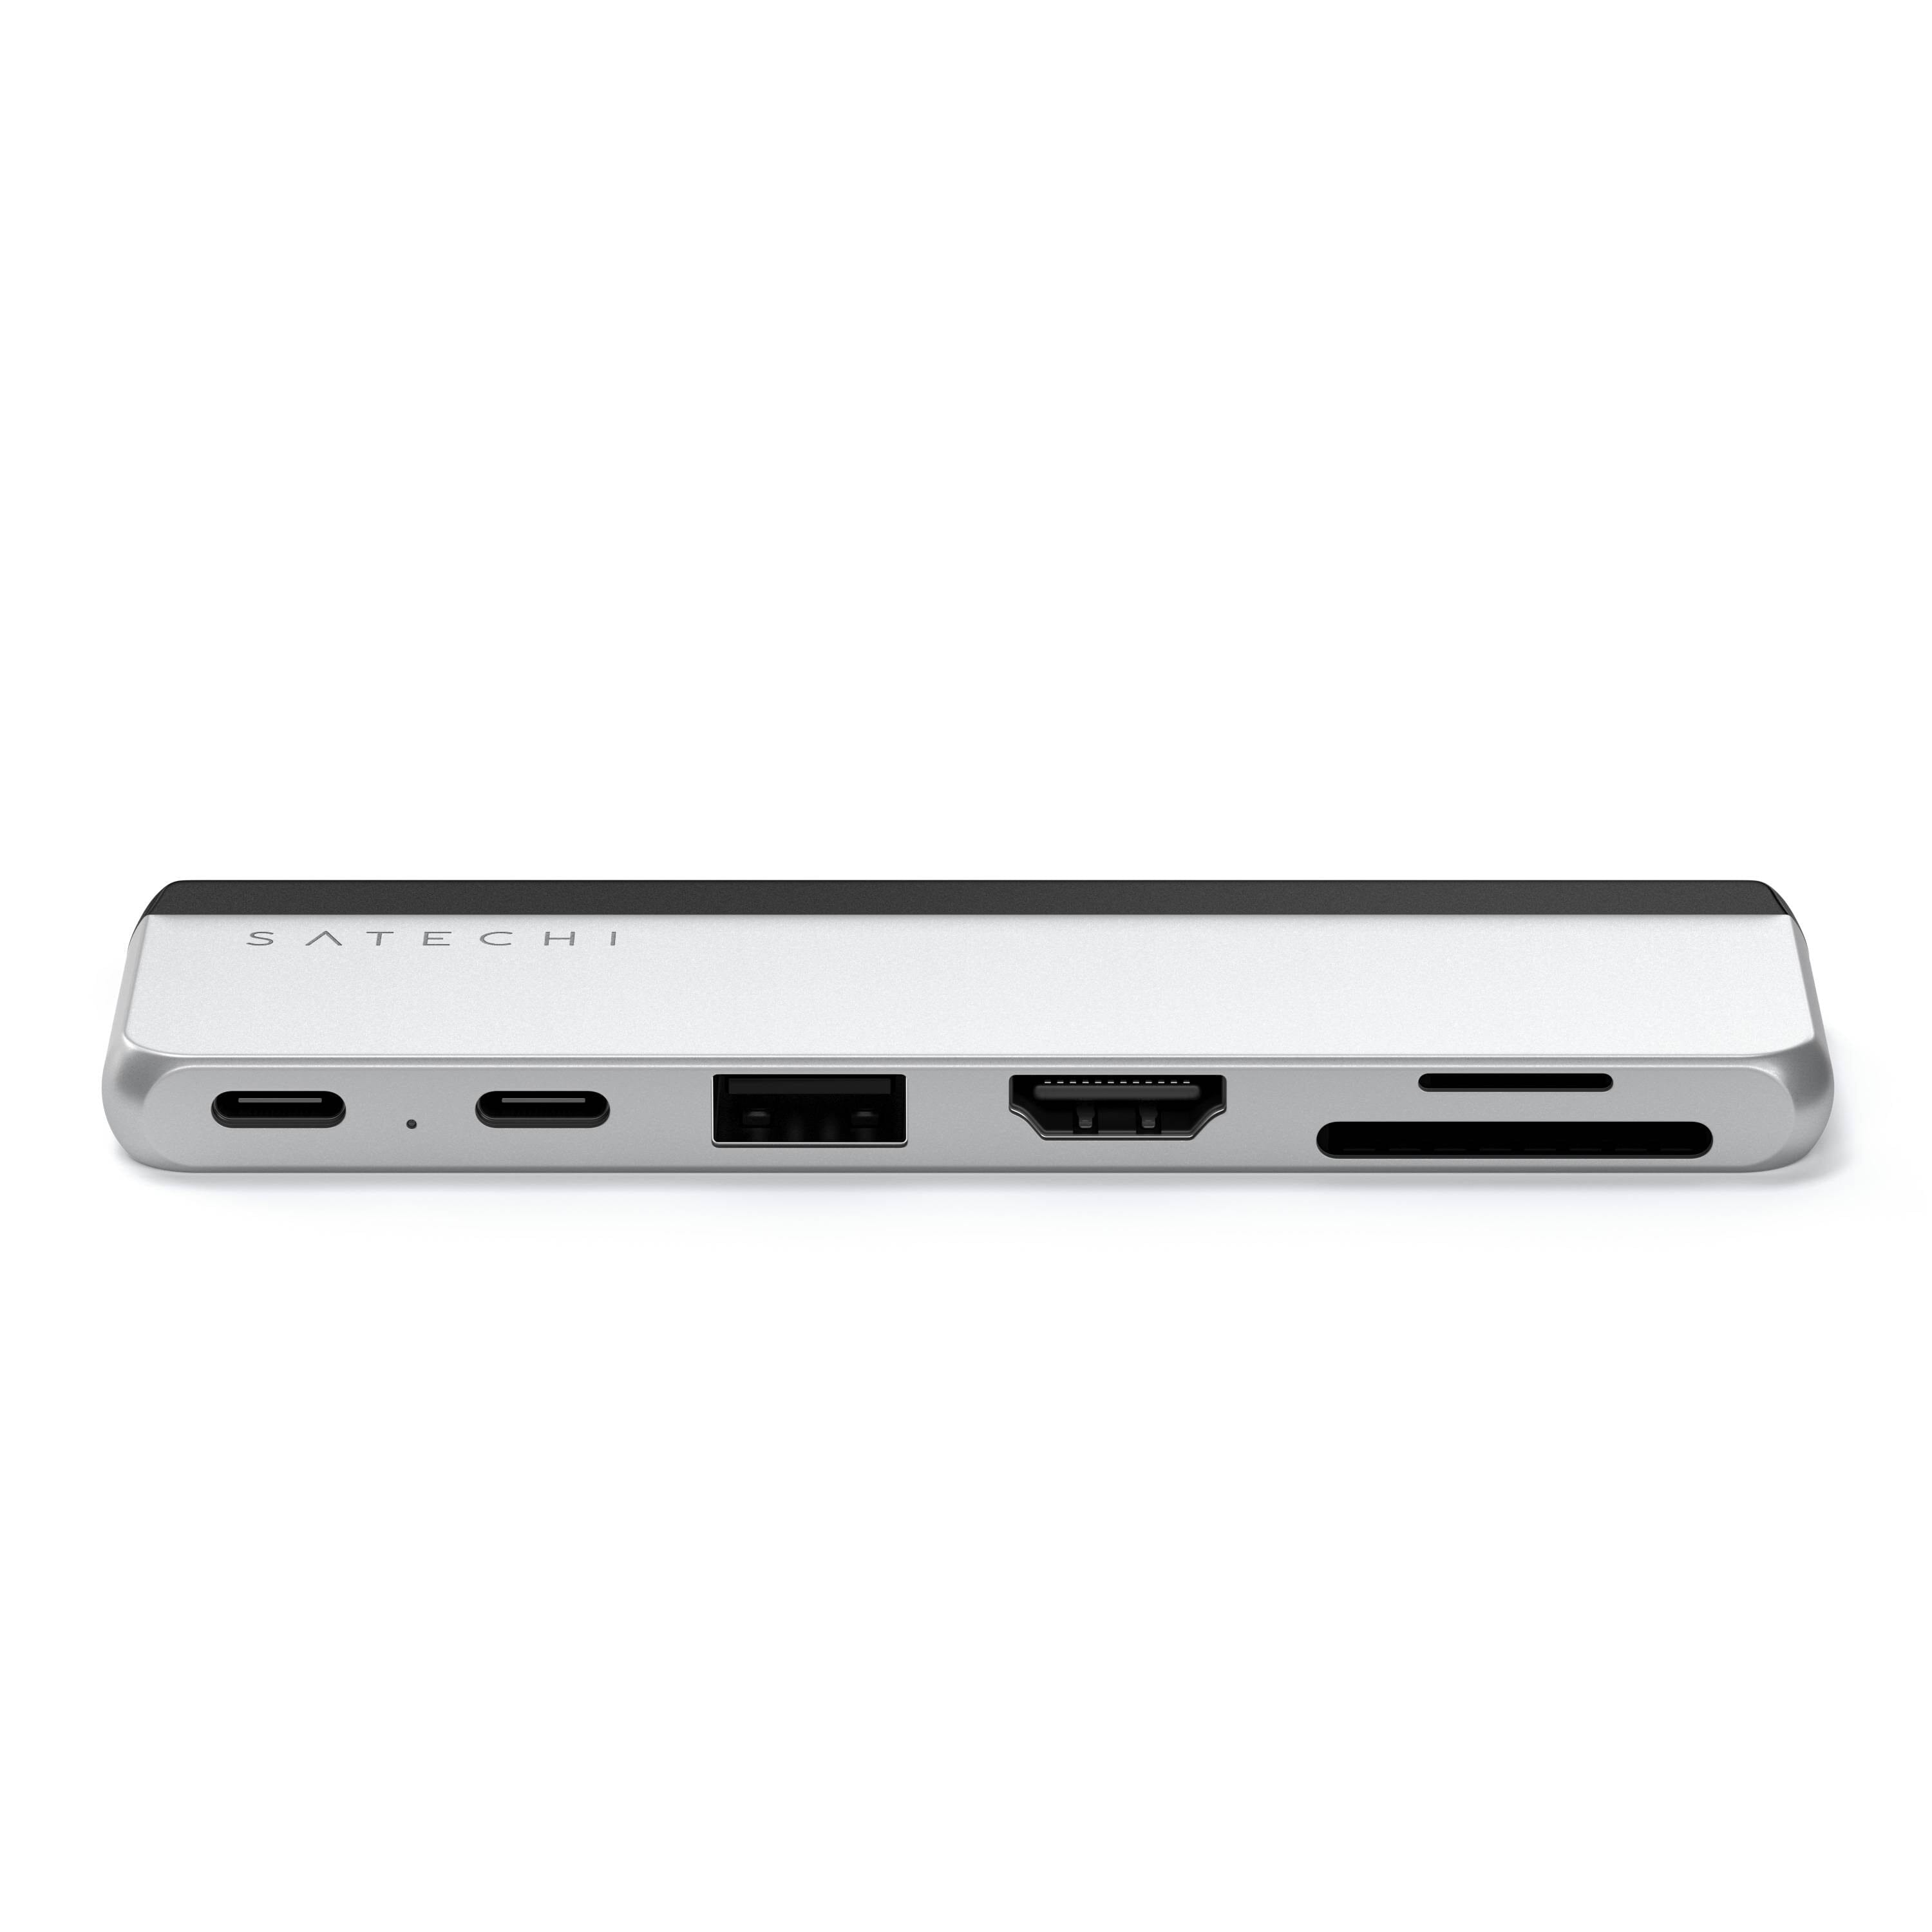 Anker 332 latest compact 5-in-1 USB-C hub with 4K HDMI port launches -   News